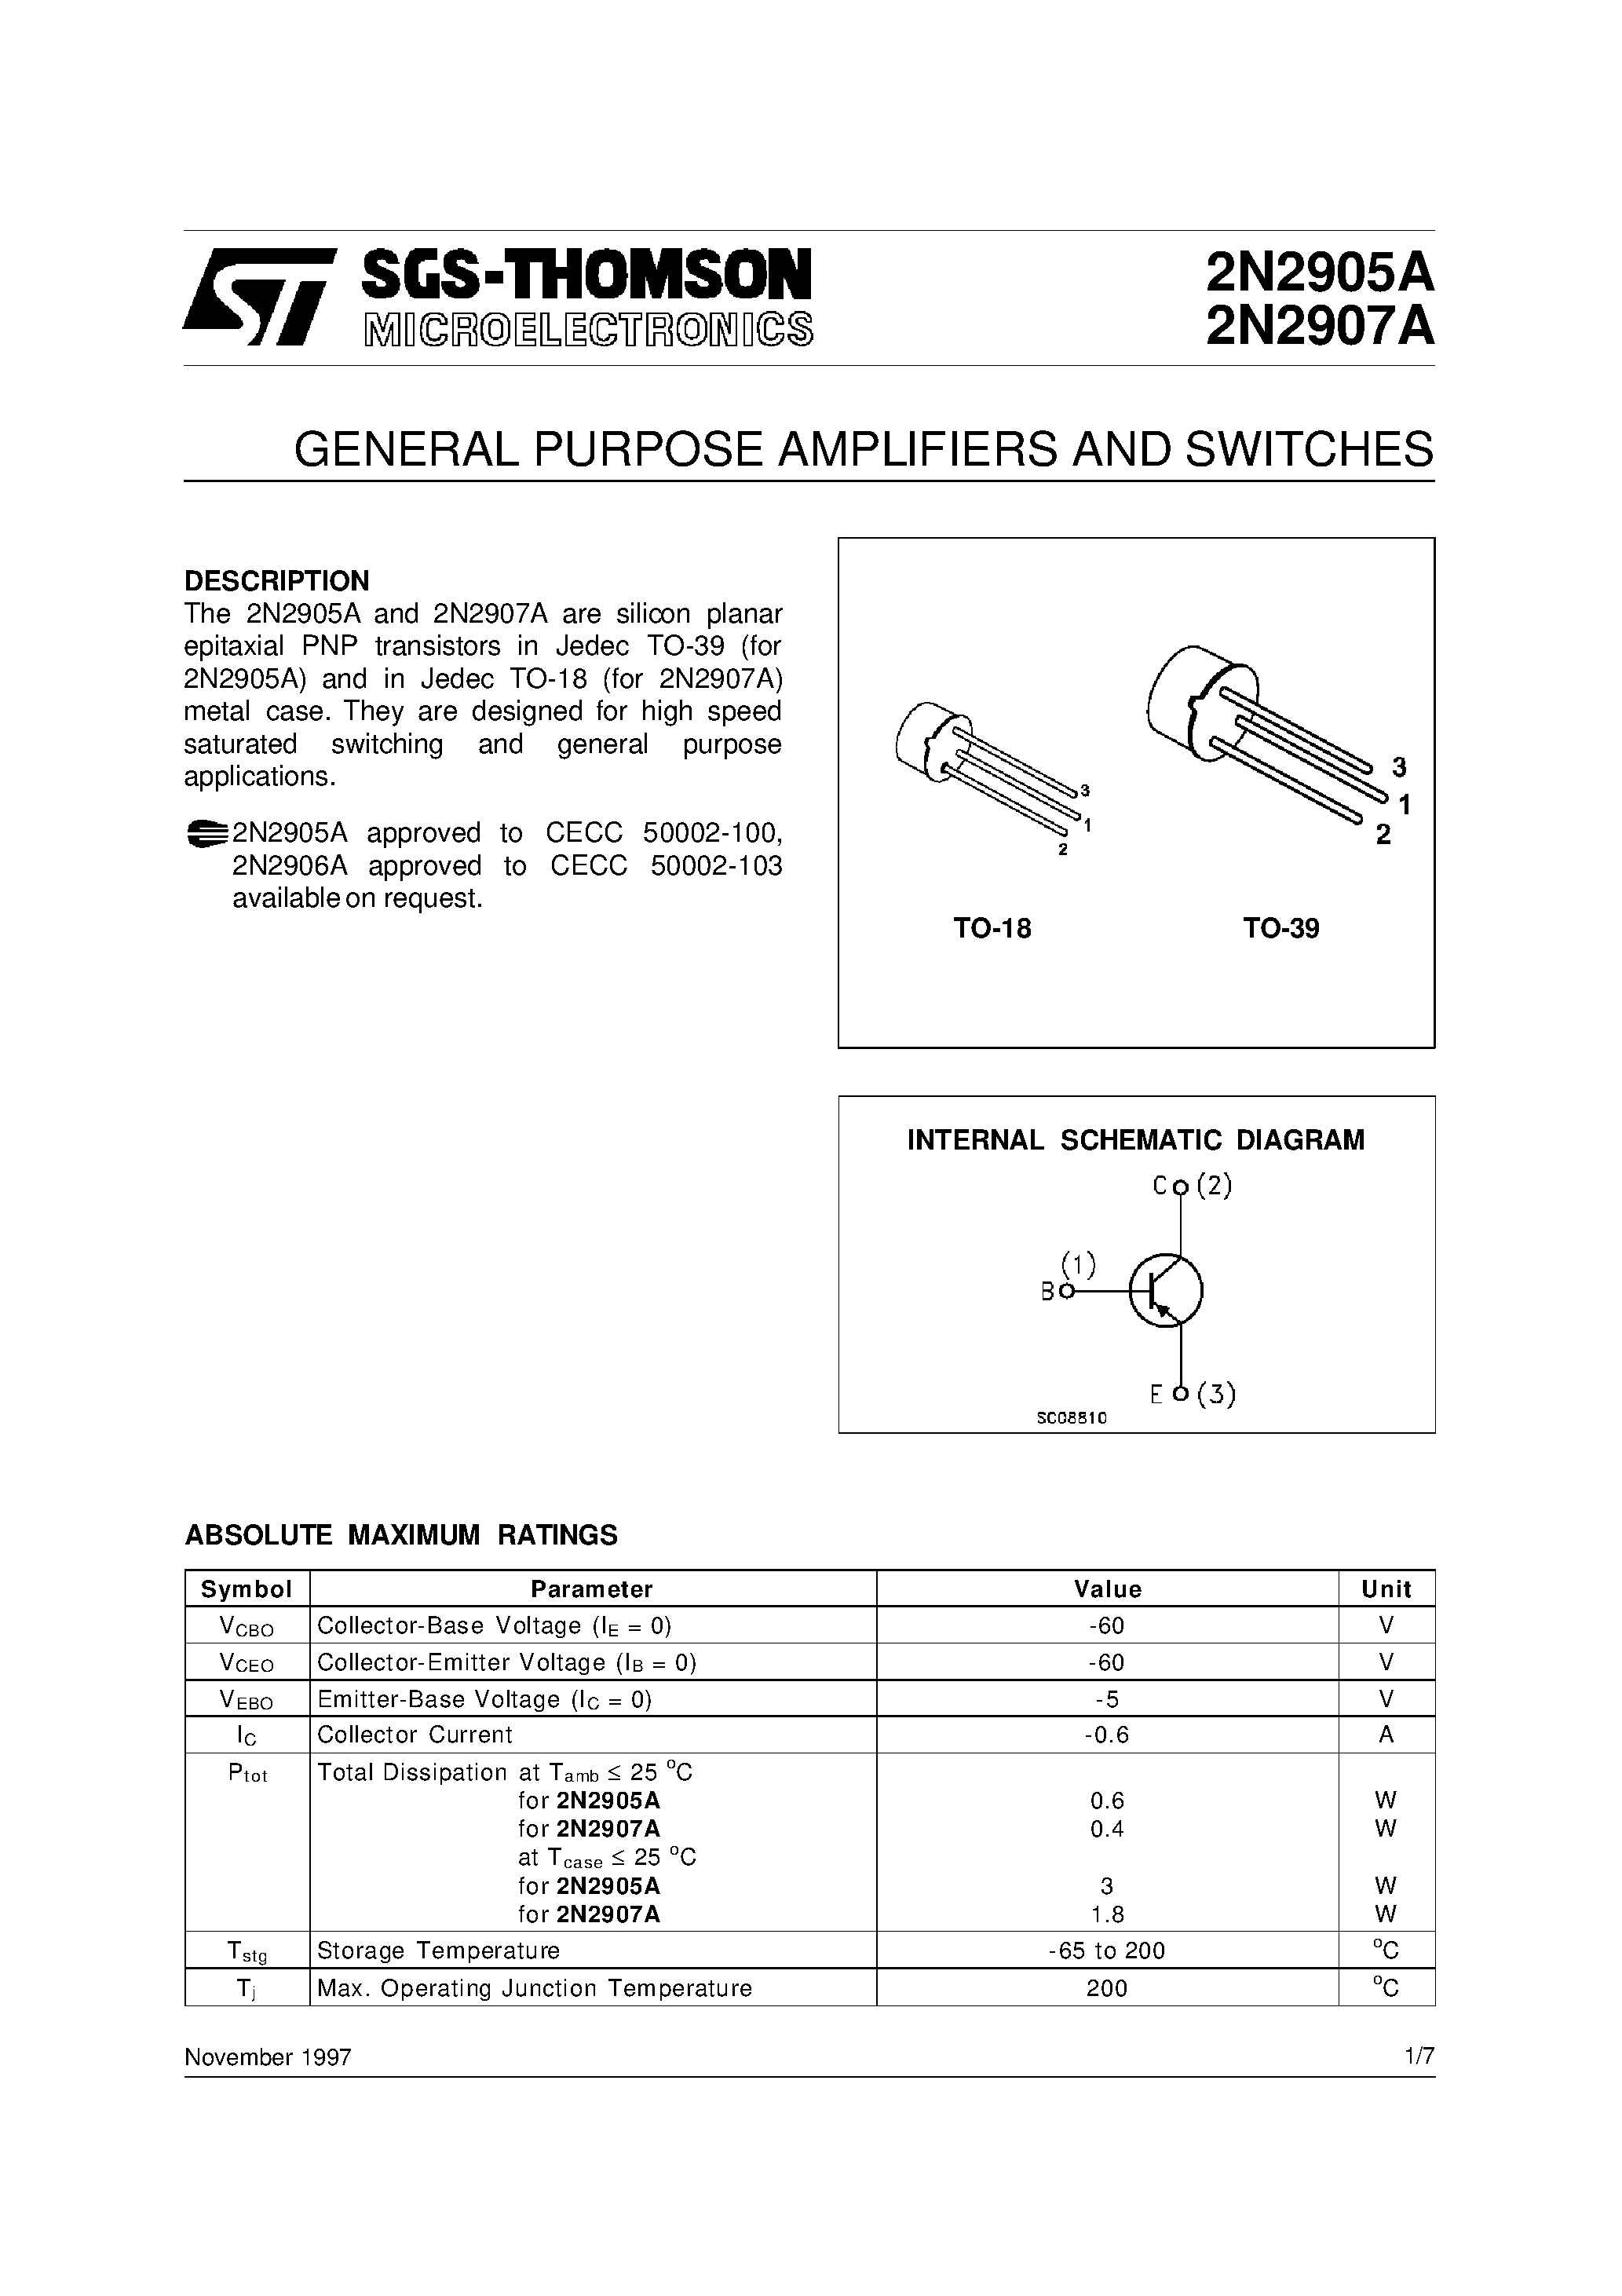 Даташит 2N2907A - GENERAL PURPOSE AMPLIFIERS AND SWITCHES страница 1